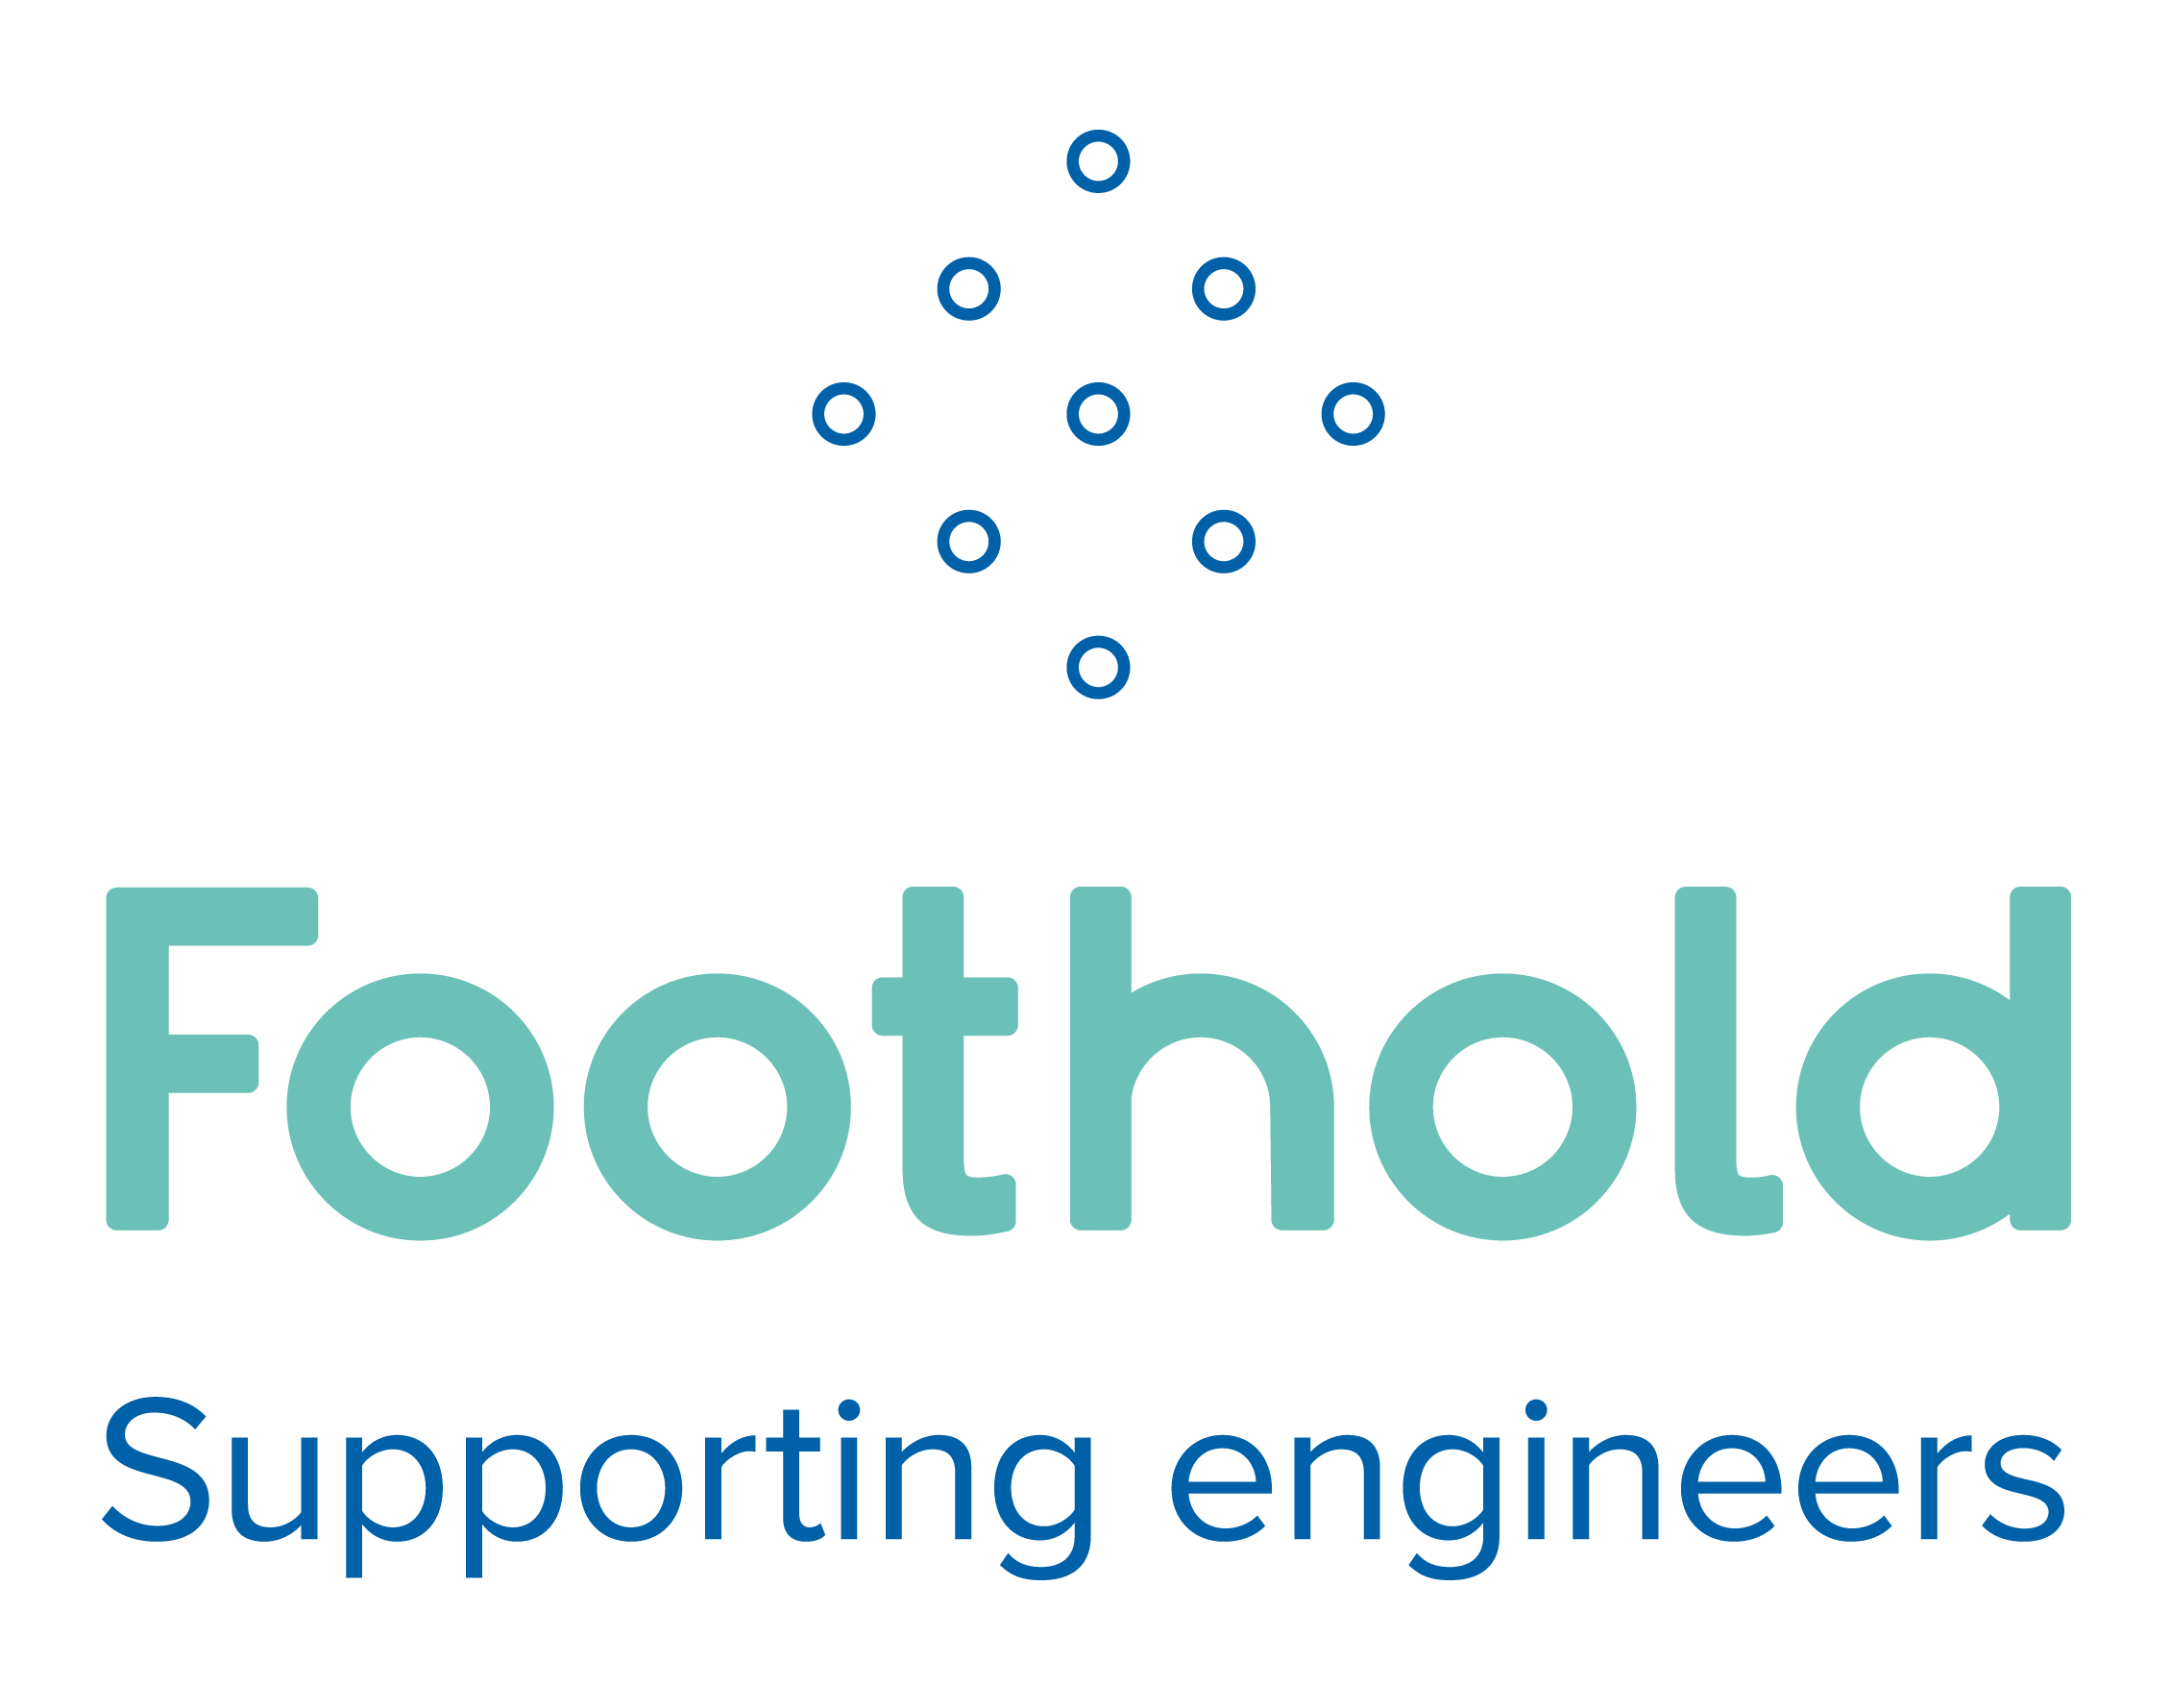 Foothold